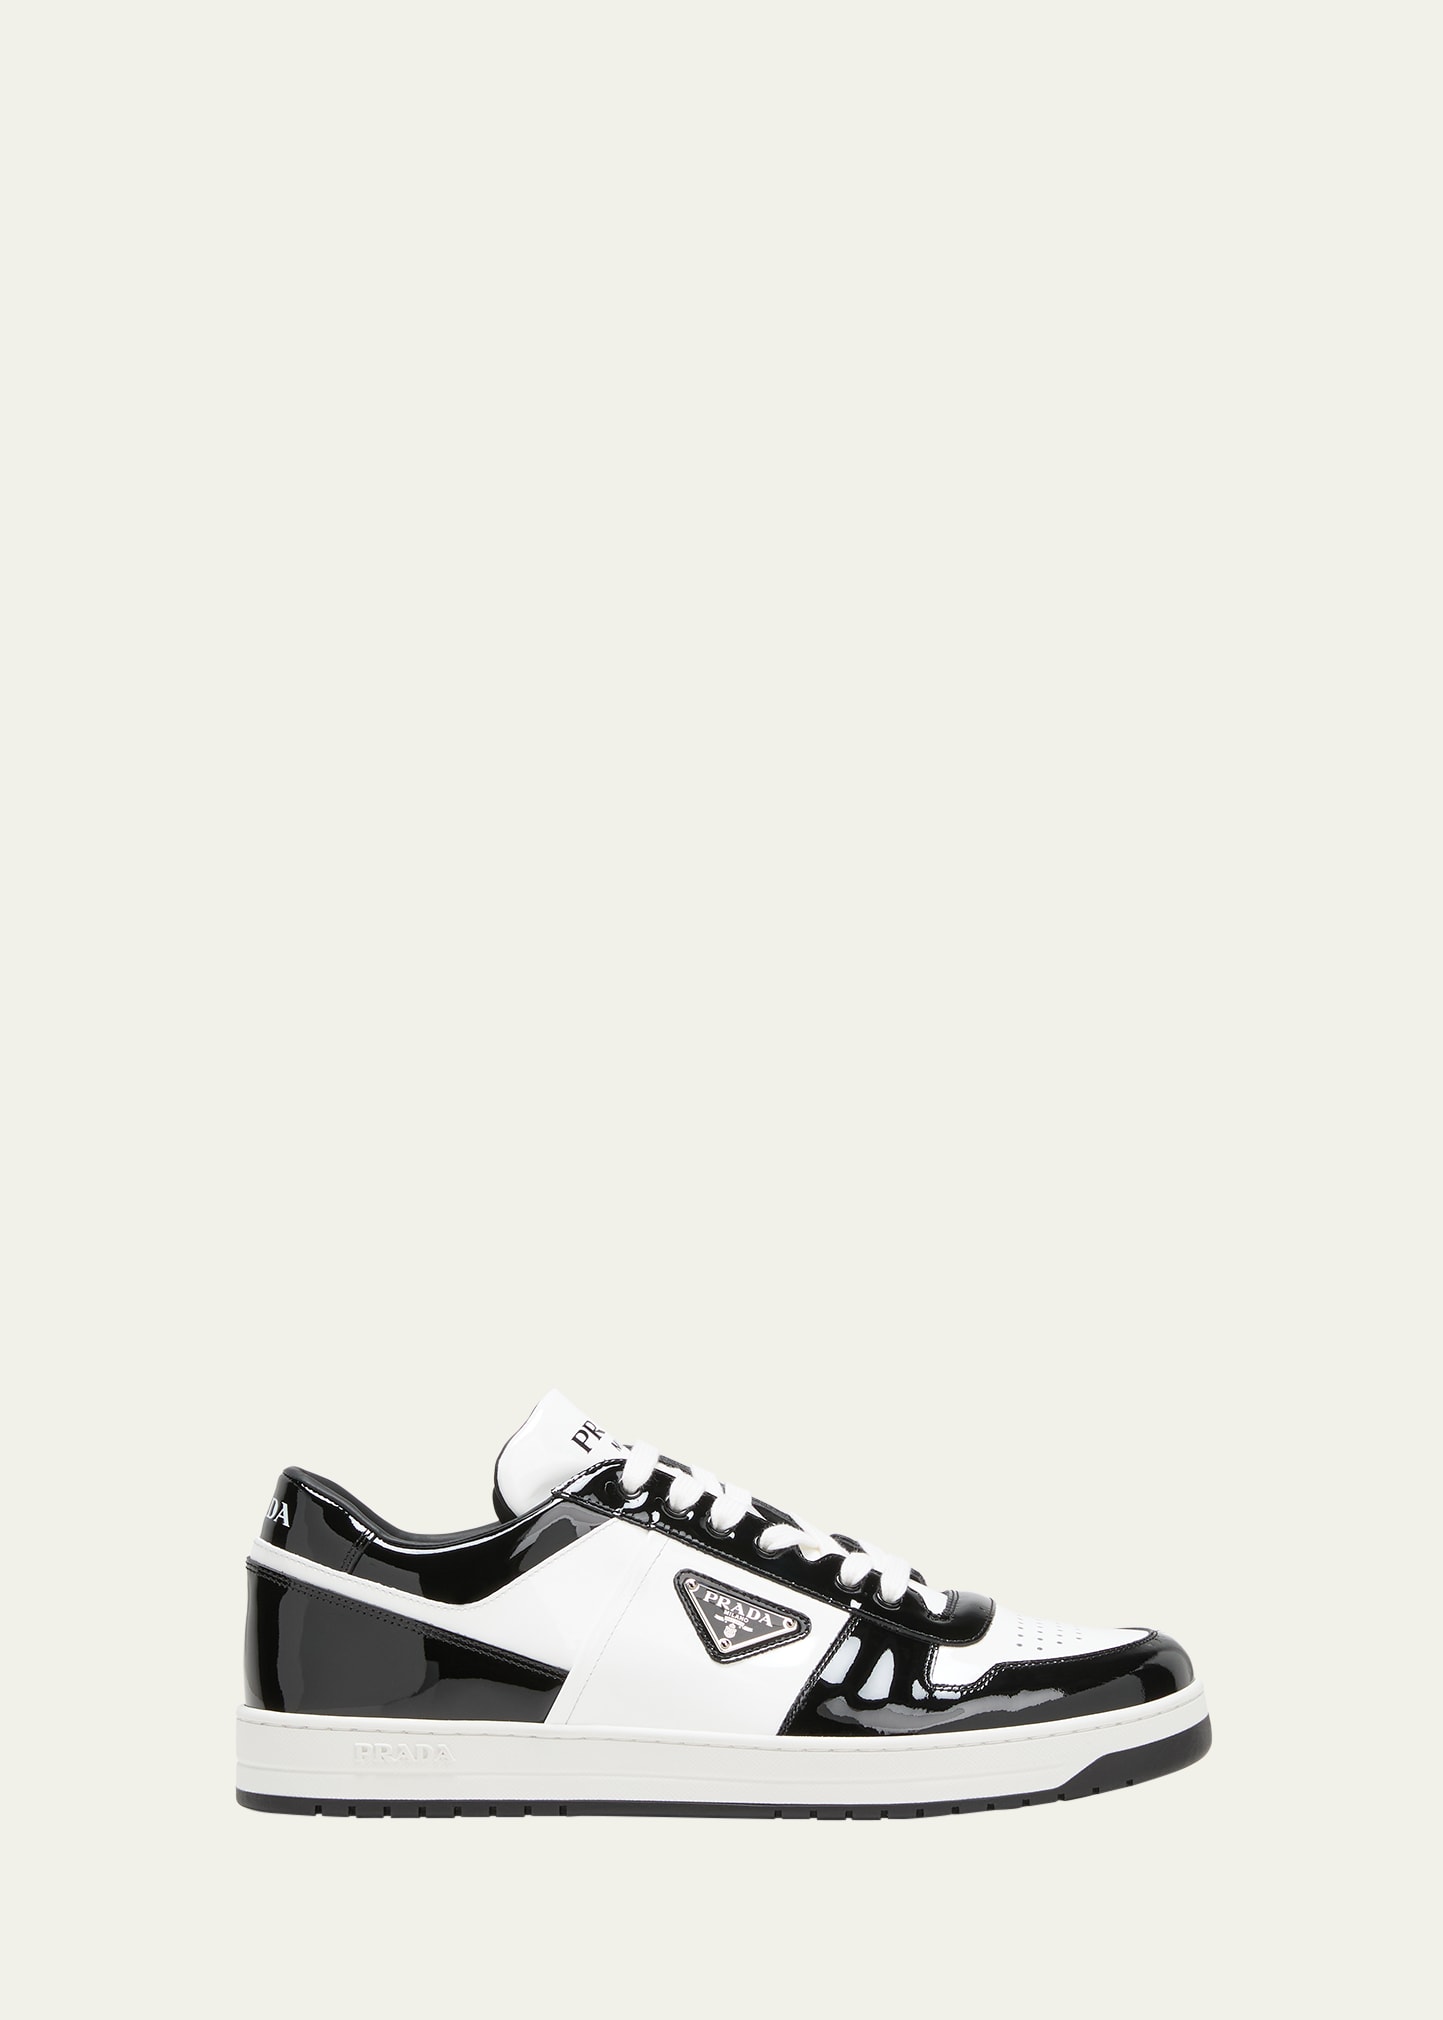 Prada Men's Downtown Patent Leather Low-top Sneakers In Black White